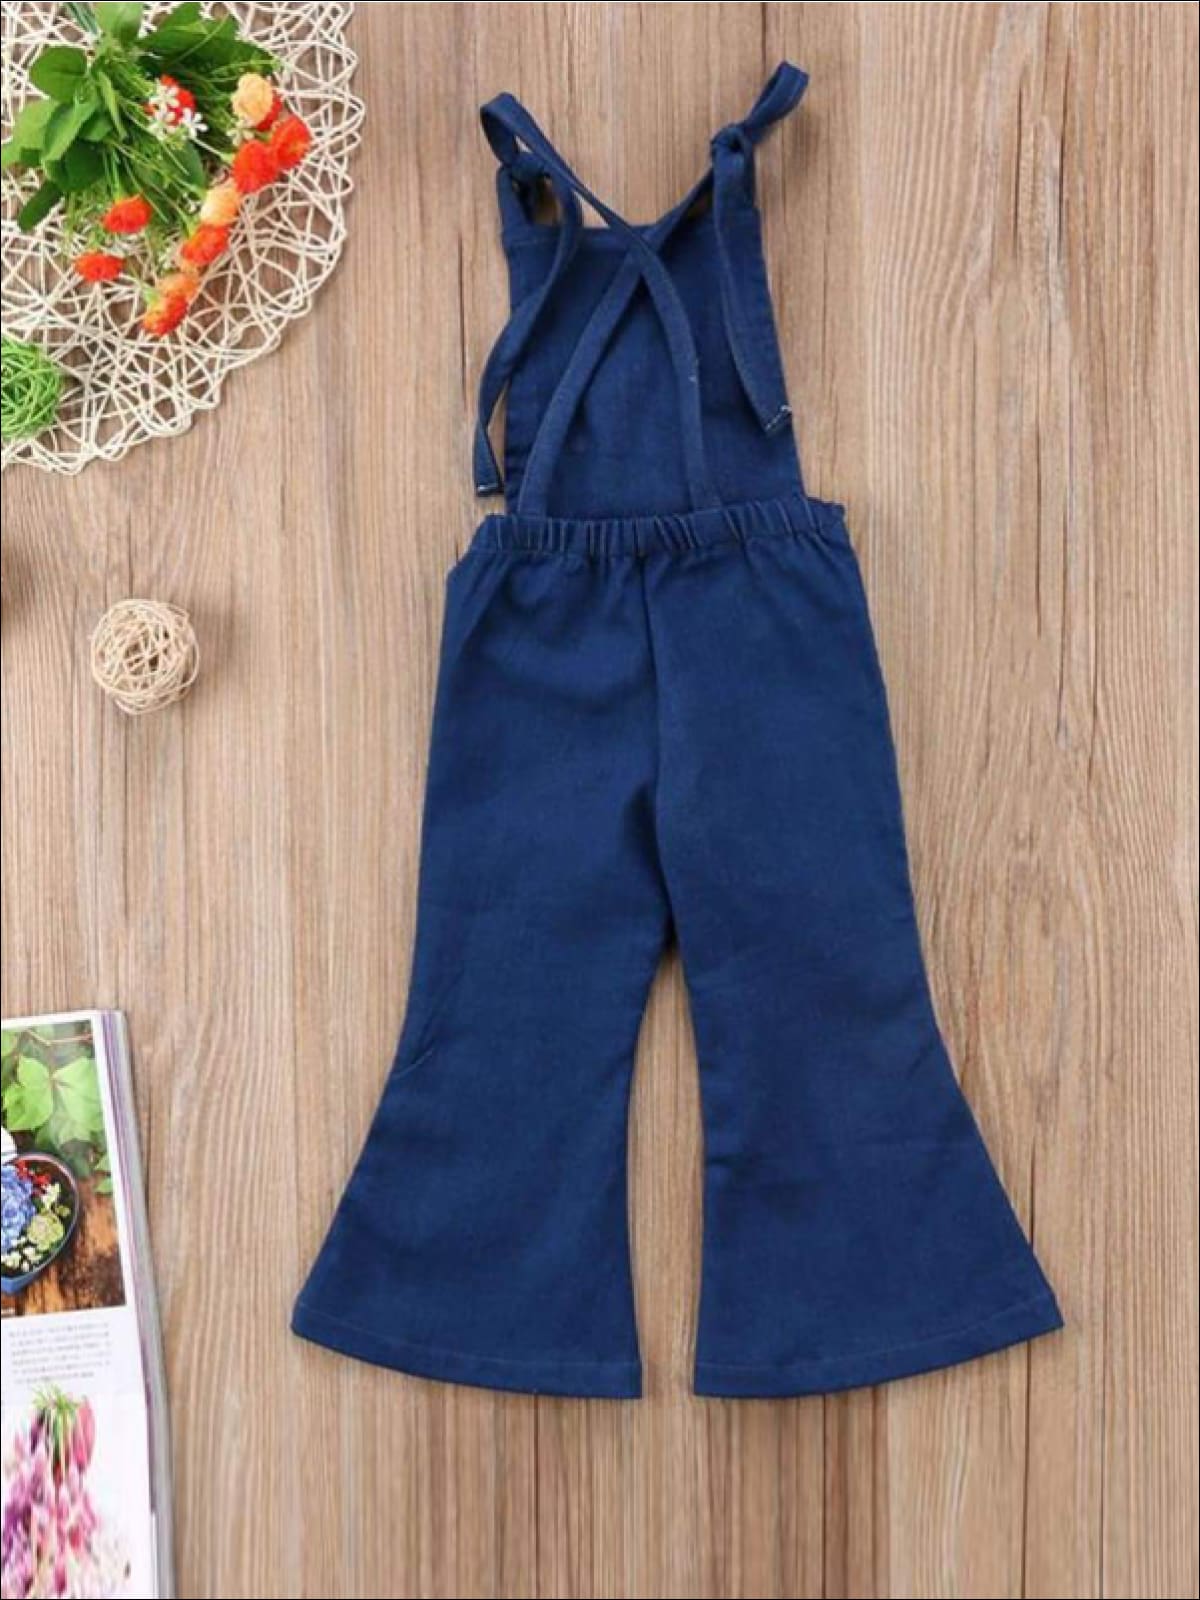 Kids Denim Clothes | Chambray Overall Bell Bottoms | Mia Belle Girls